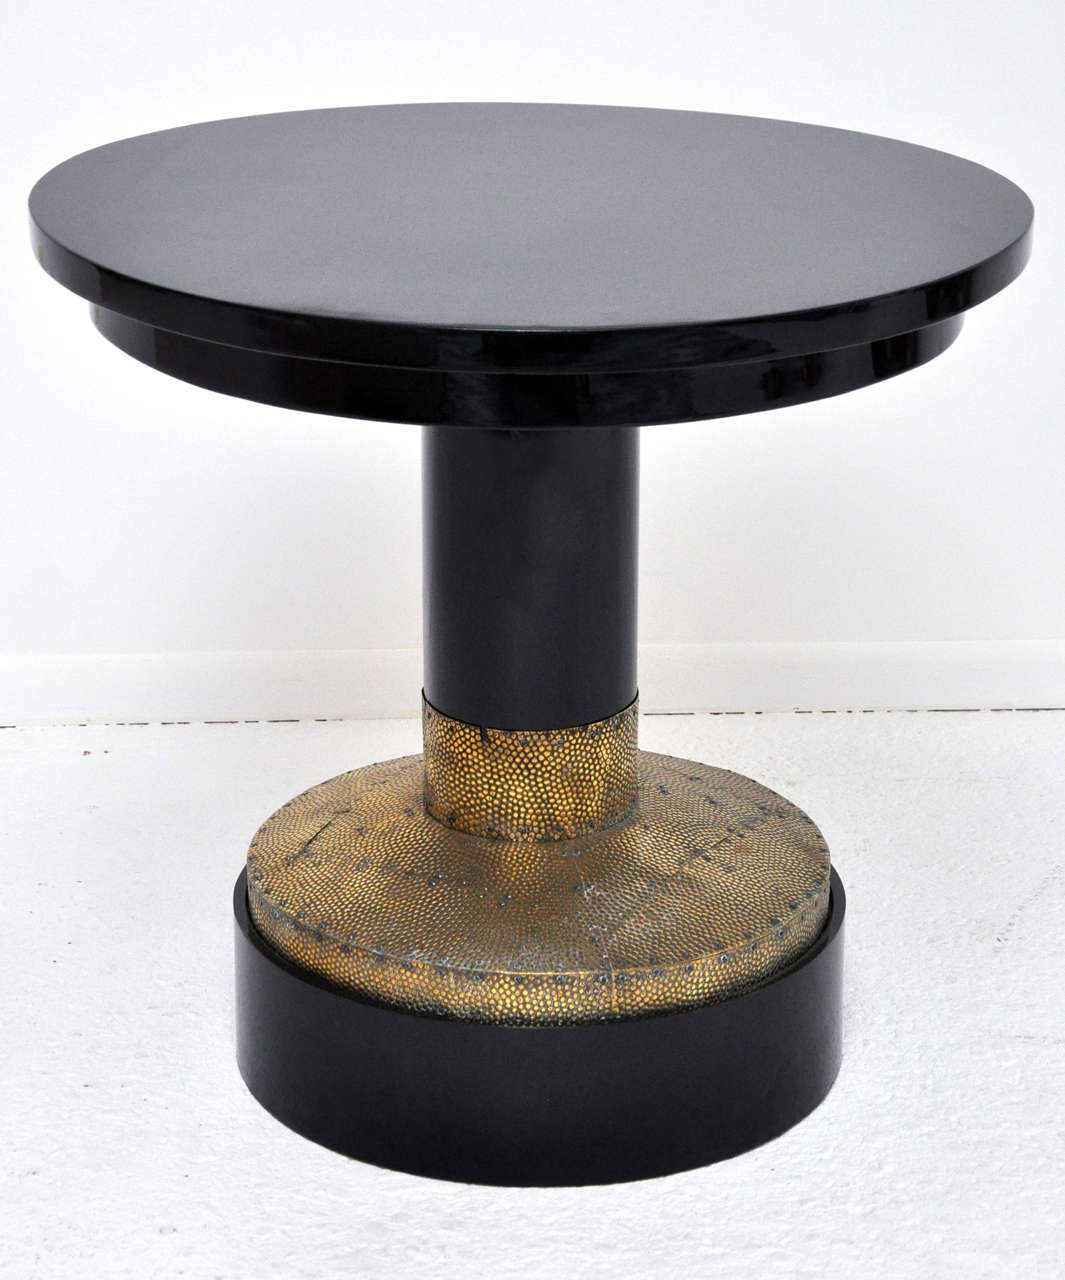 Original table is antique. Black lacquer base was recently fabricated to stabilize table and lacquer finish has been restored.